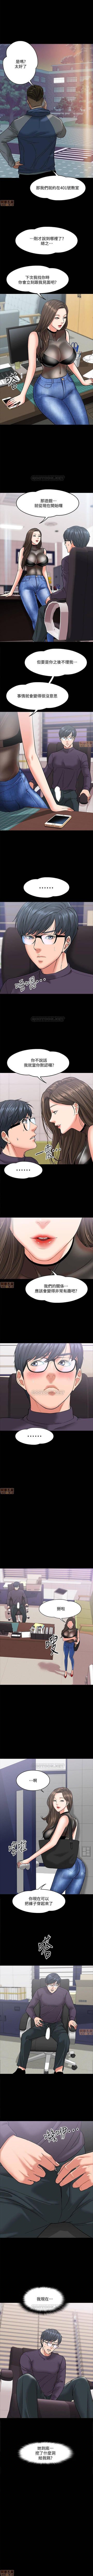 PROFESSOR, ARE YOU JUST GOING TO LOOK AT ME? | DESIRE SWAMP | 教授，你還等什麼? Ch. 5Manhwa 5